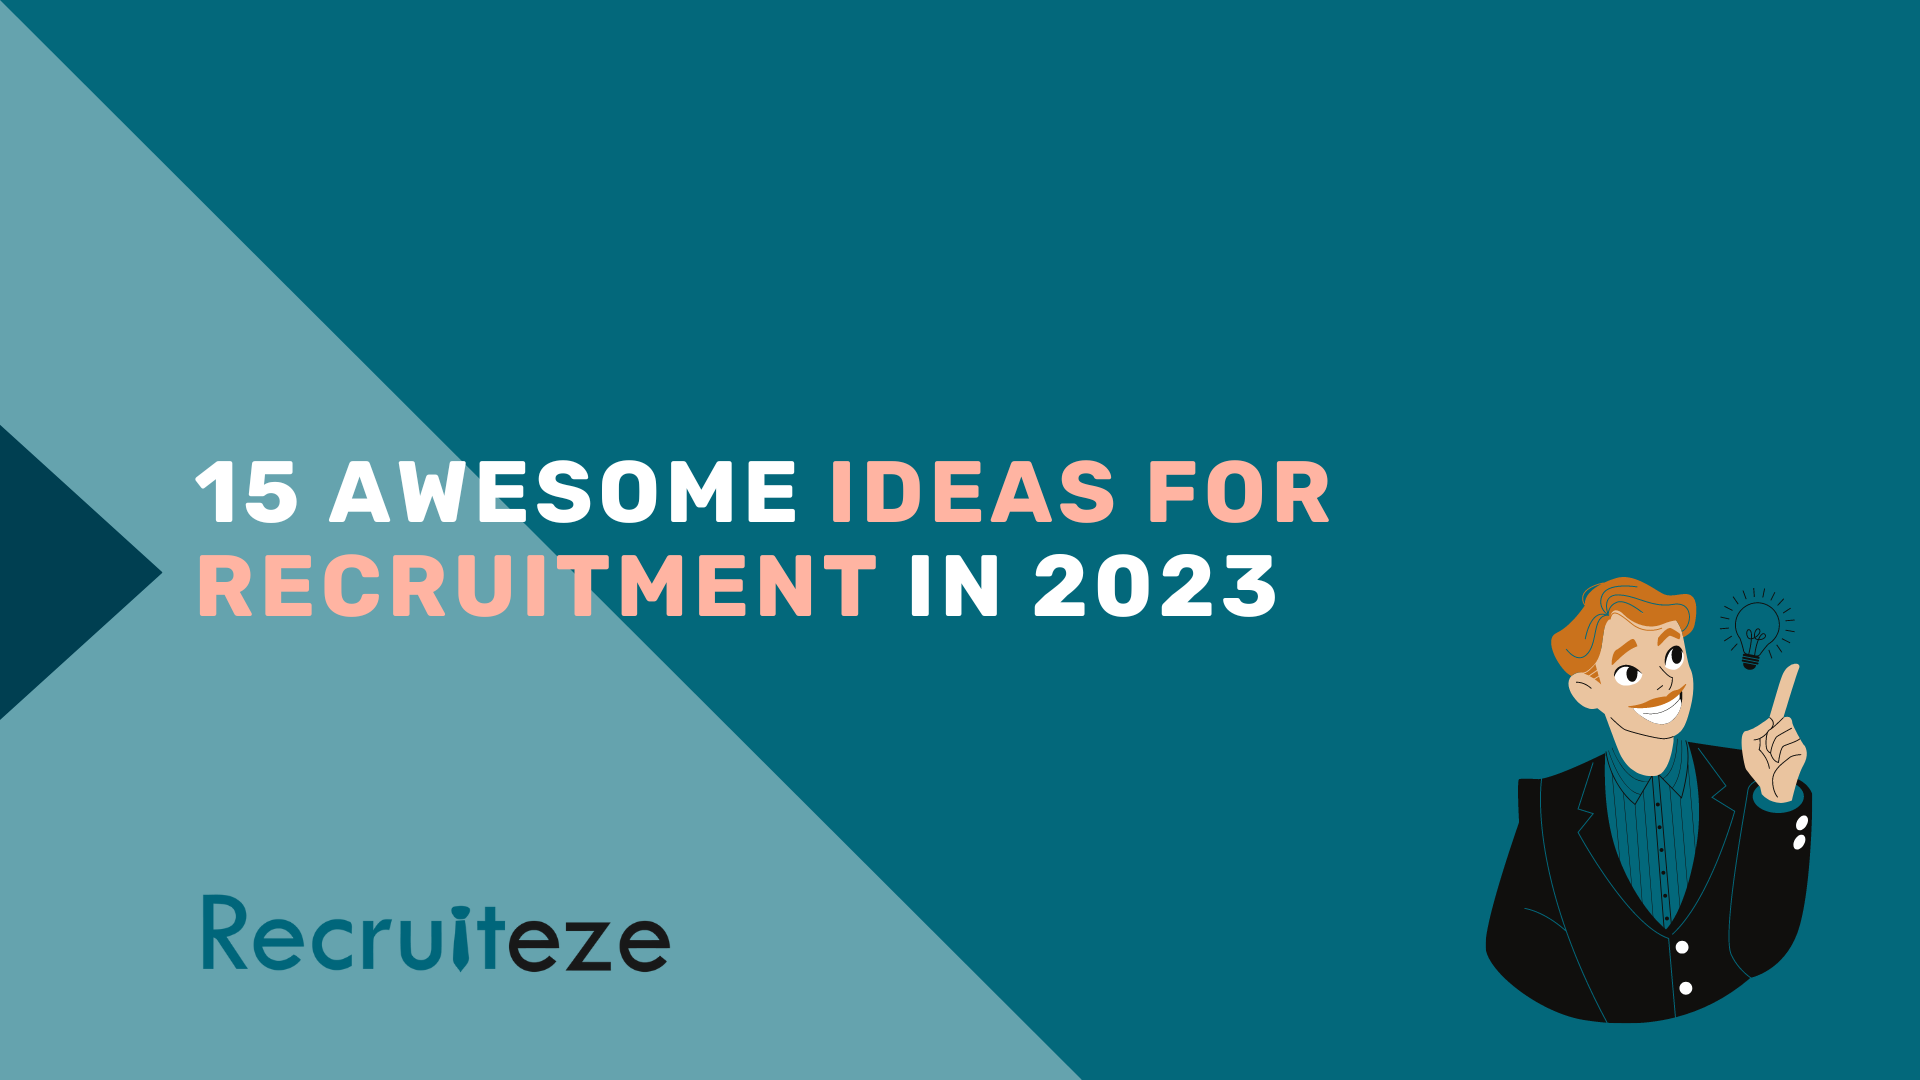 15 Awesome Ideas for Recruitment in 2023